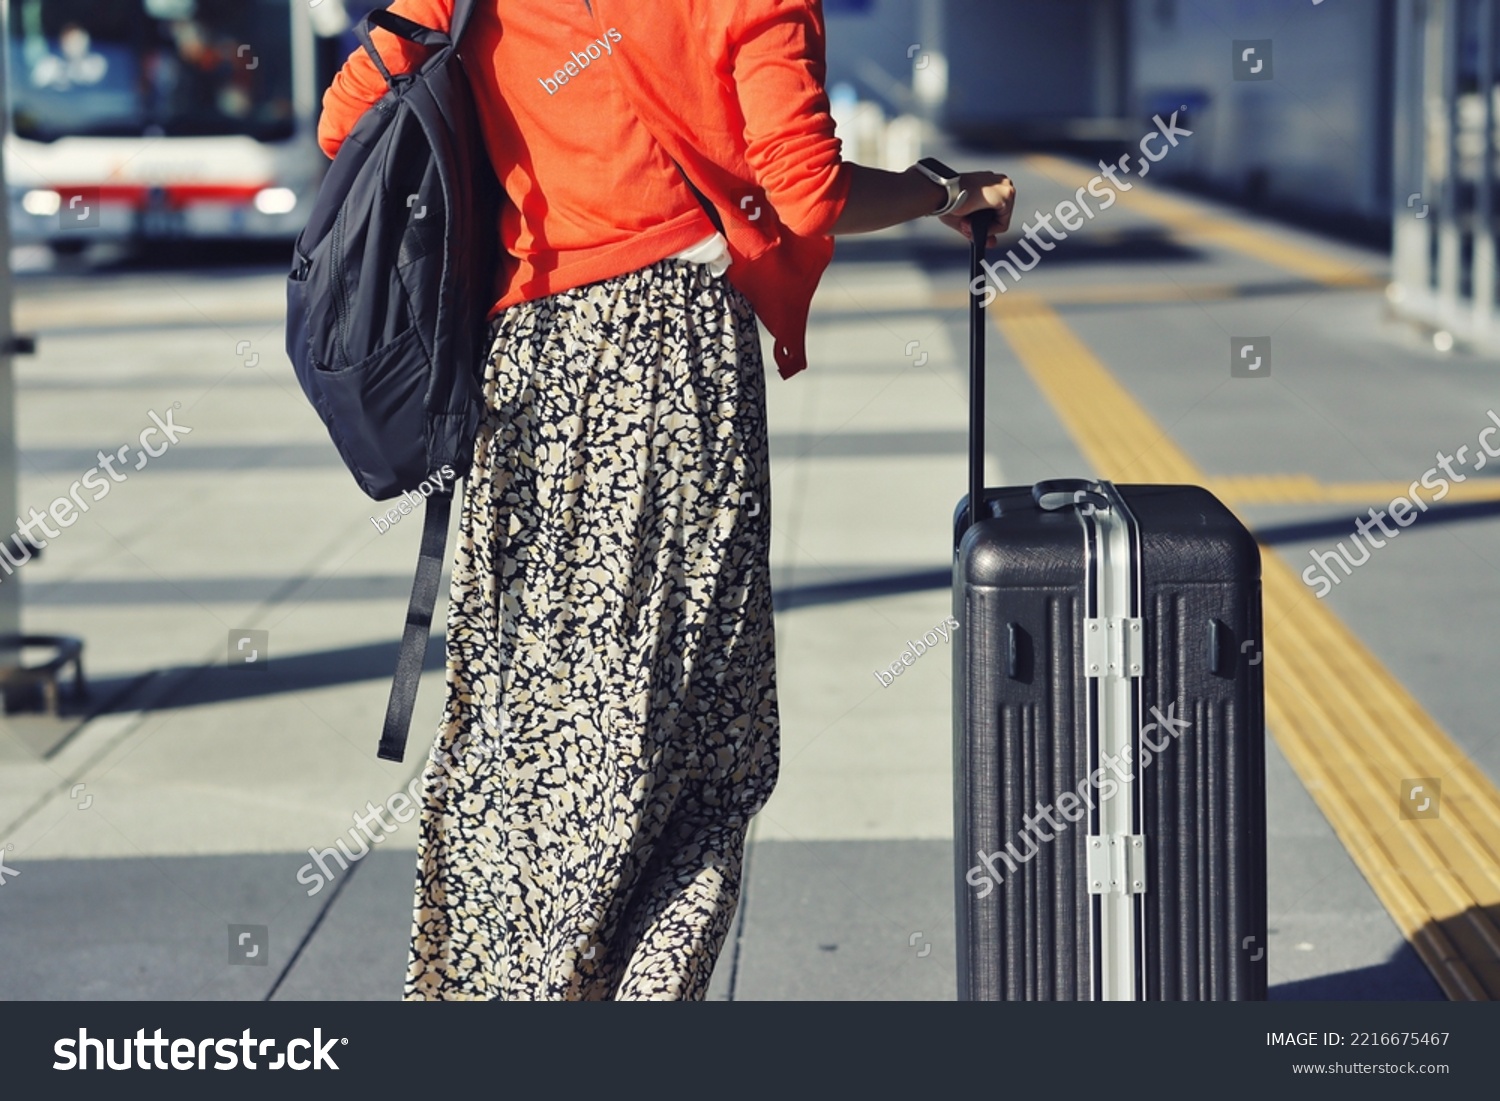 Back view of a woman traveling with luggage #2216675467